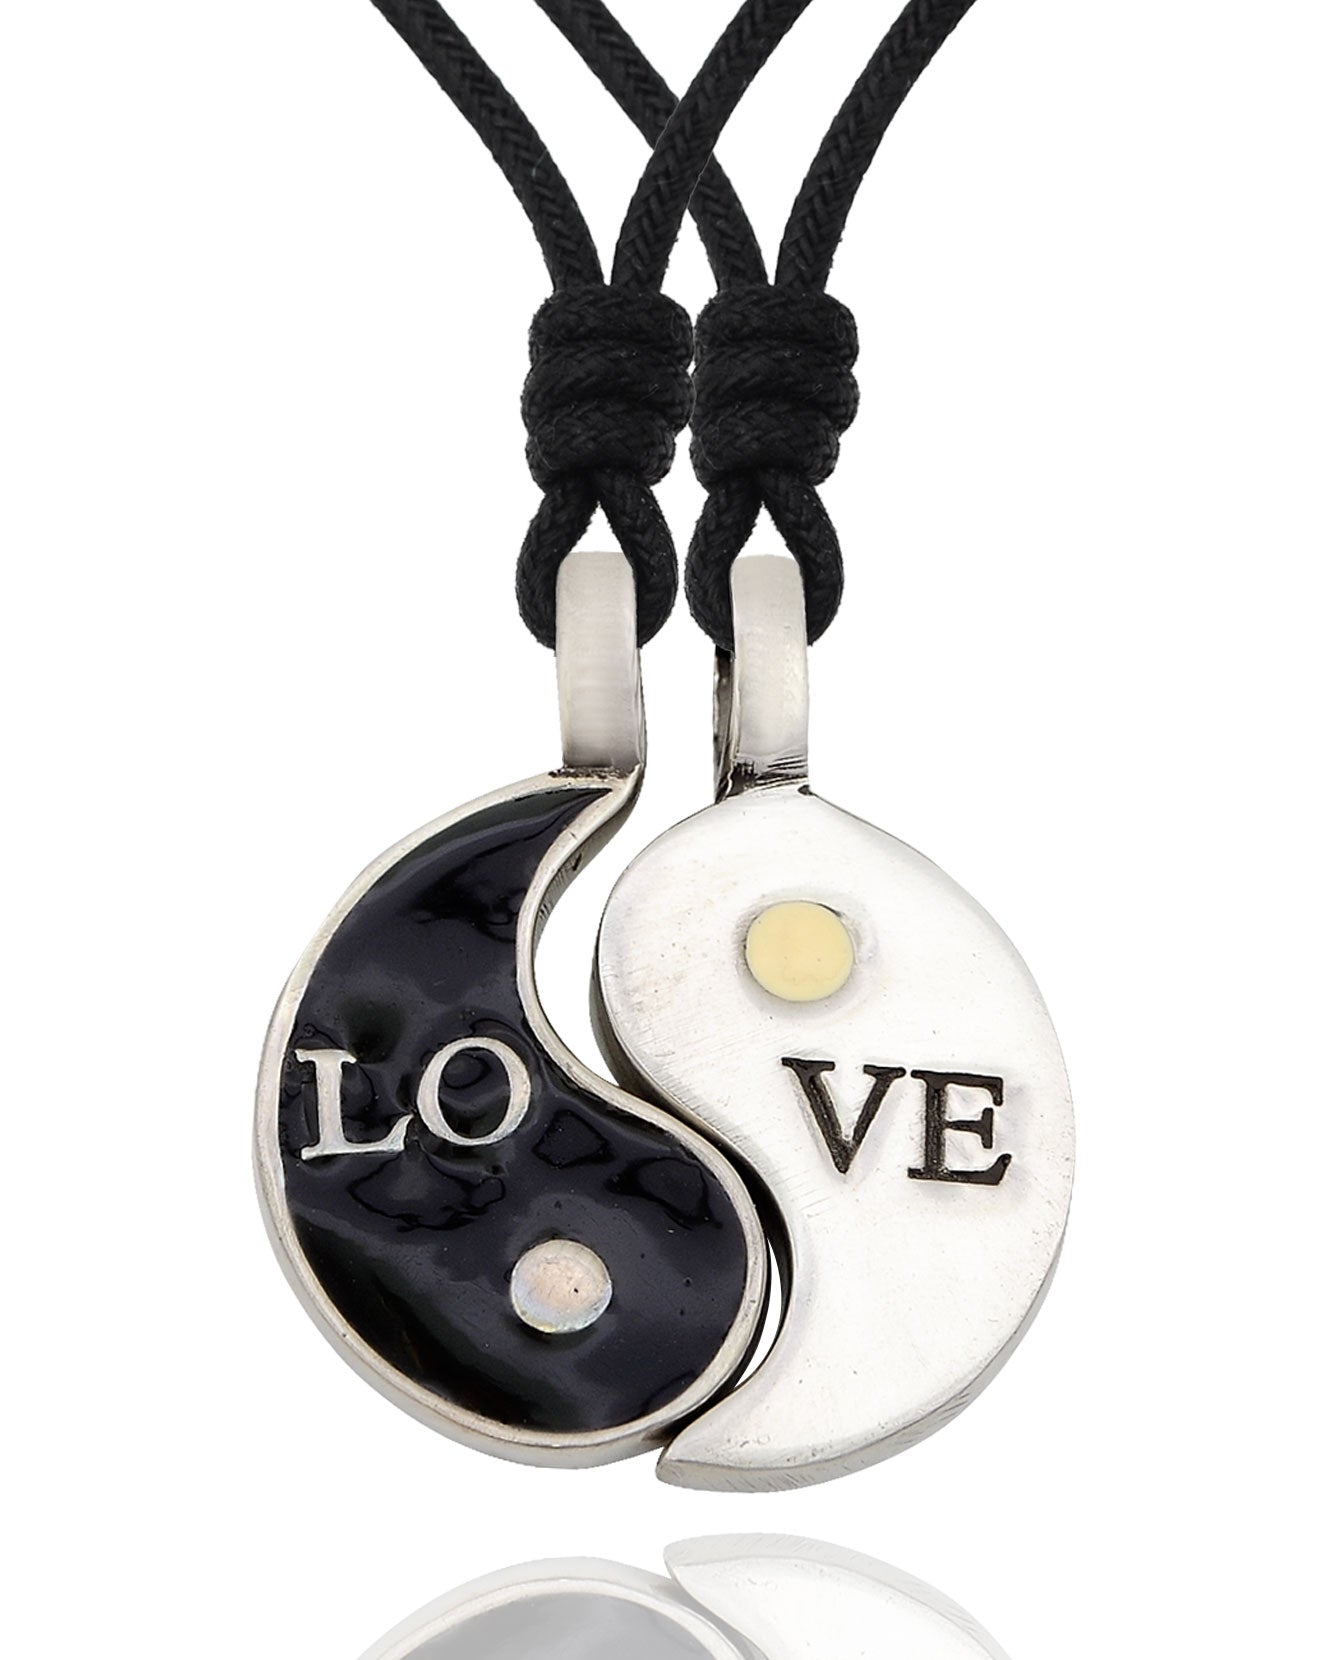 Yin Yang Love Silver Pewter Charm Necklace Pendant Jewelry With Cotton Cord